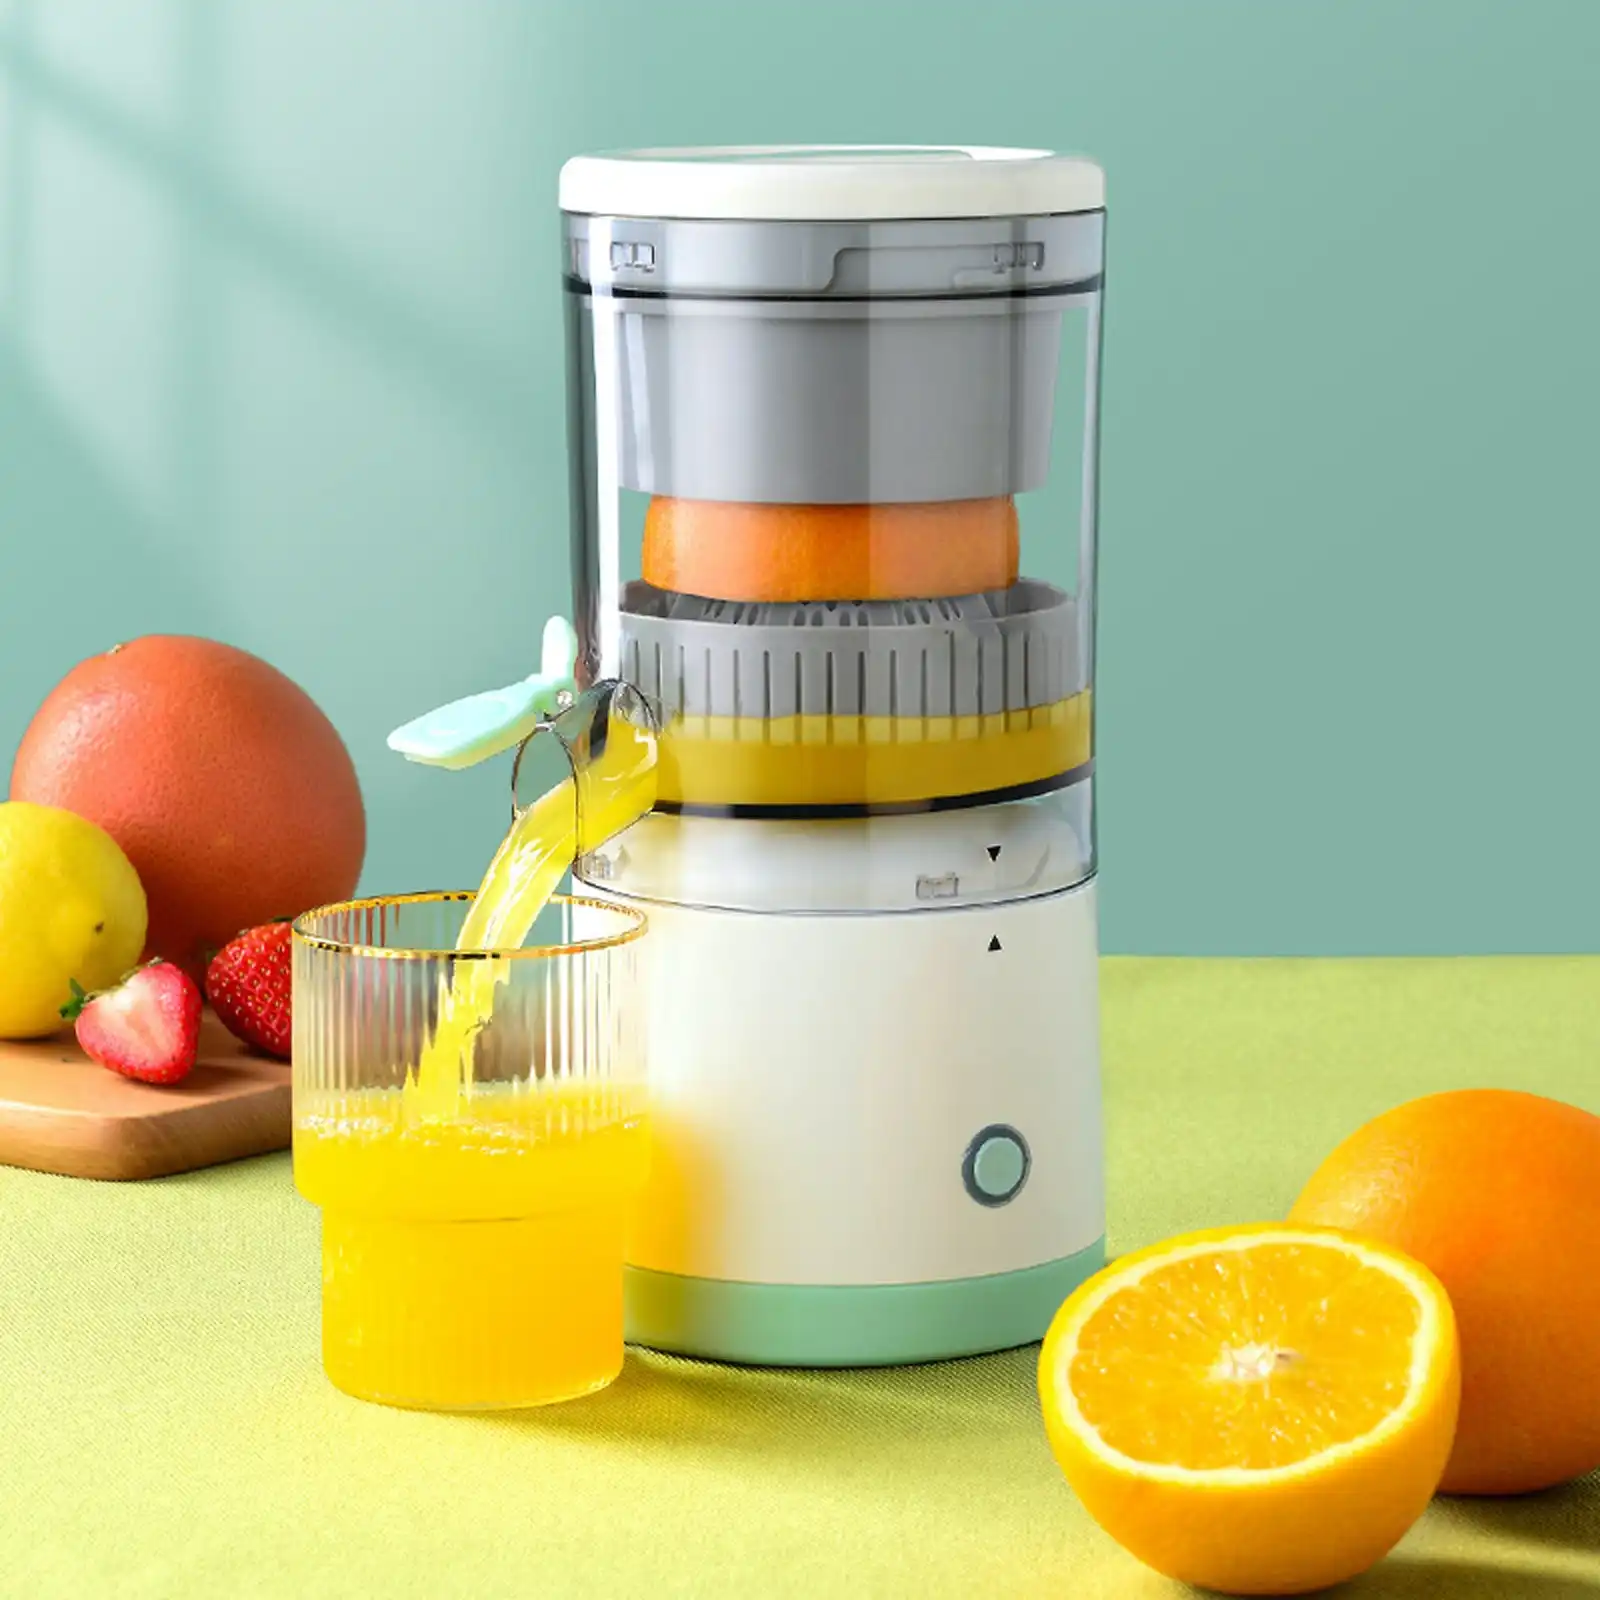 TODO 7.4V Rechargeable Electric Citrus Juicer Juice Extractor Press Juicer USB Charge